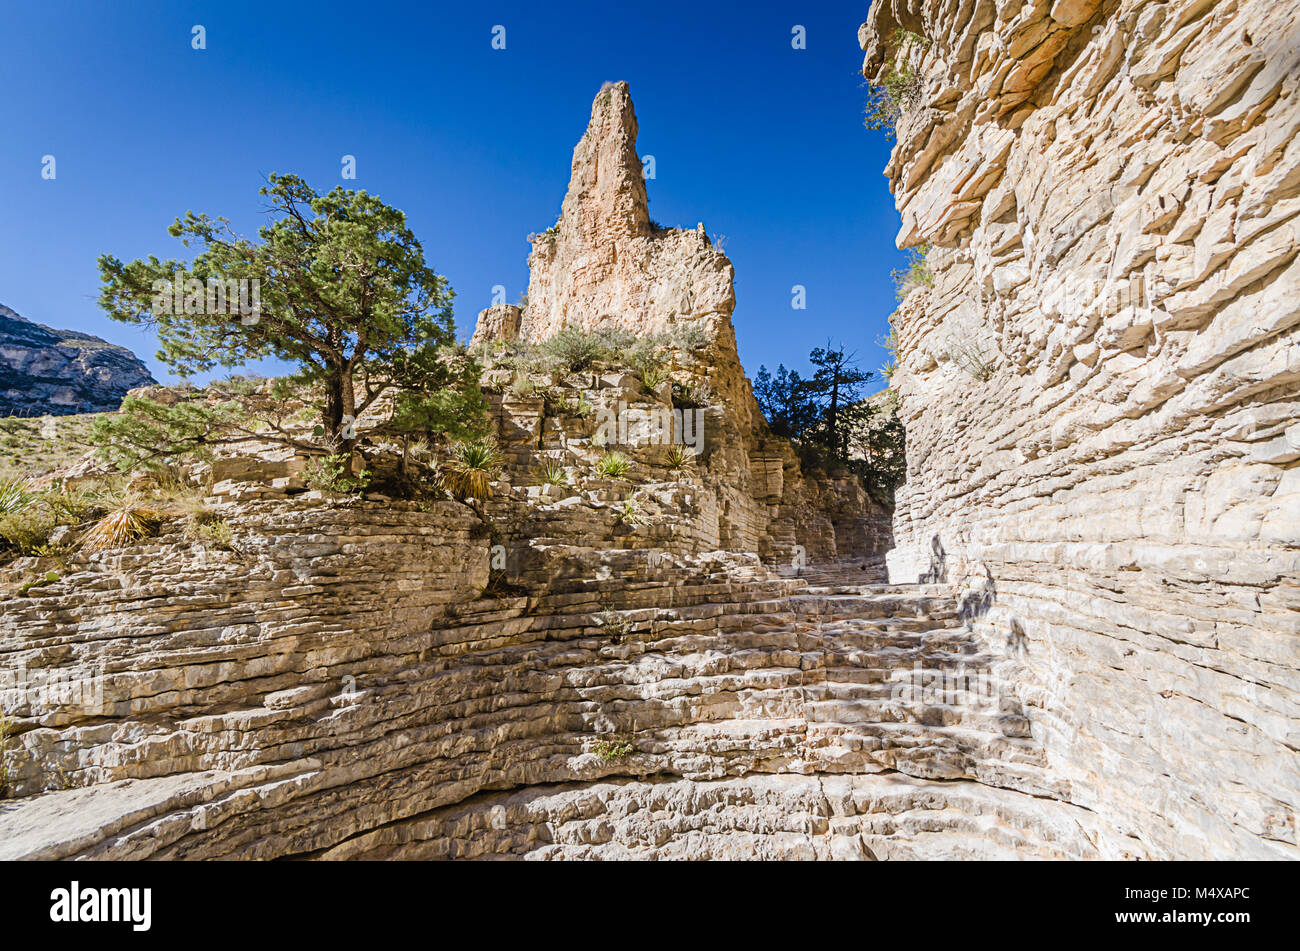 Vertical shot of a natural rock formation aptly named 'Hiker's Staircase' at Guadalupe Mountains National Park in Texas. Stock Photo